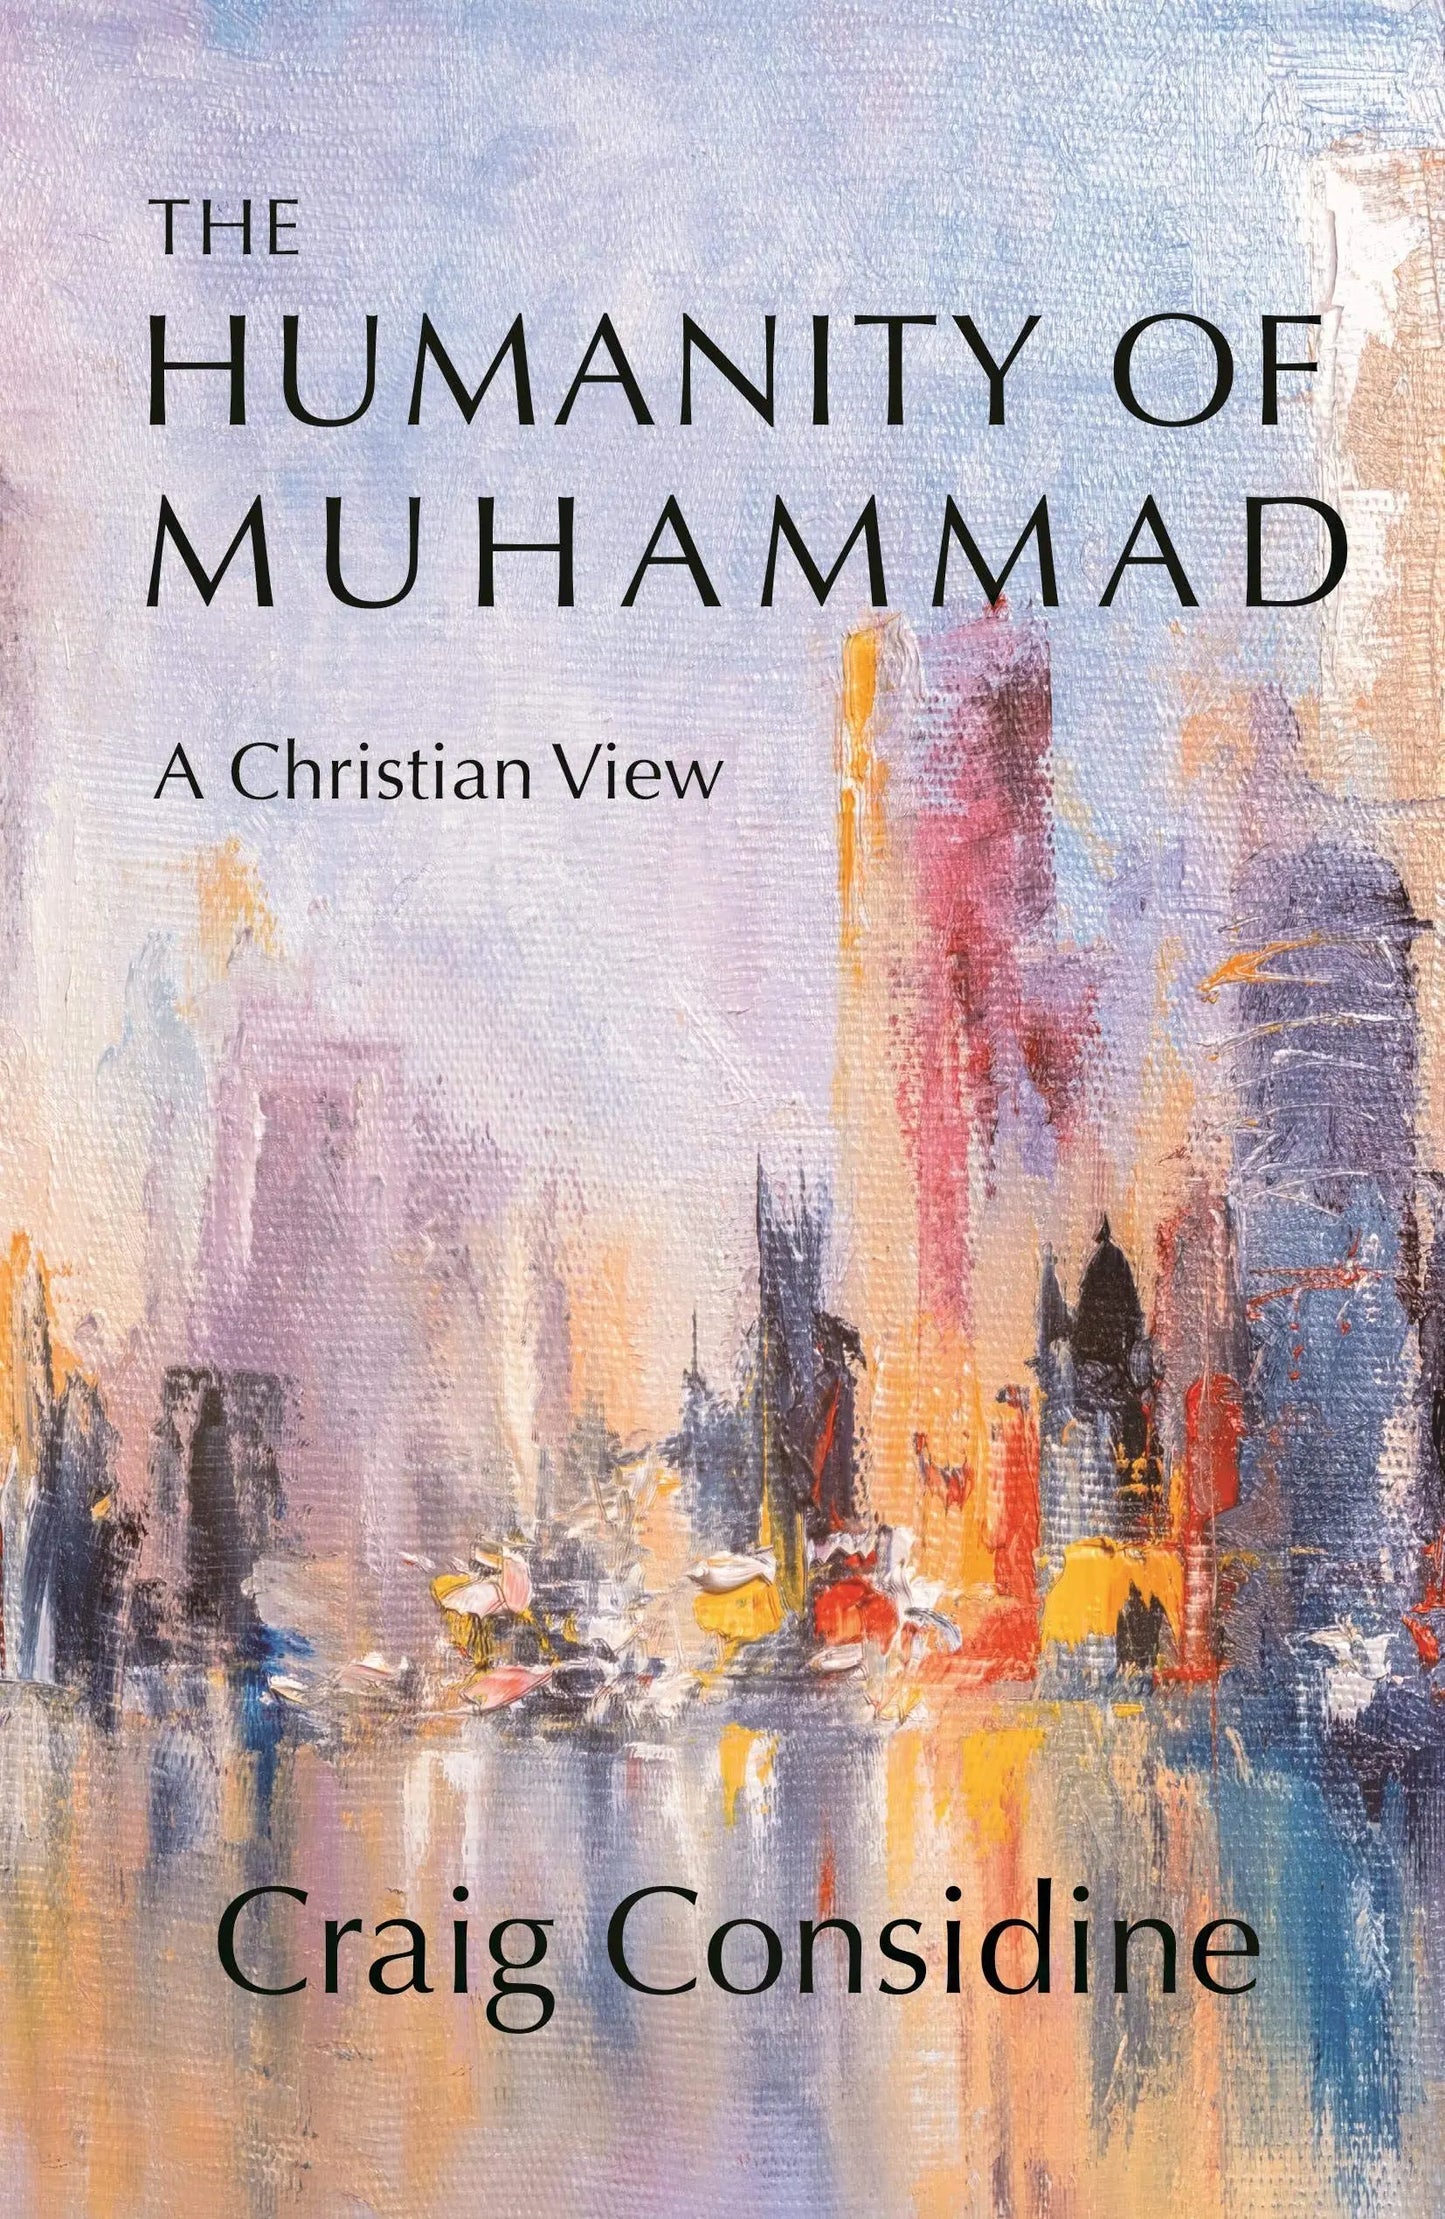 The Humanity of Muhammad: A Christian View